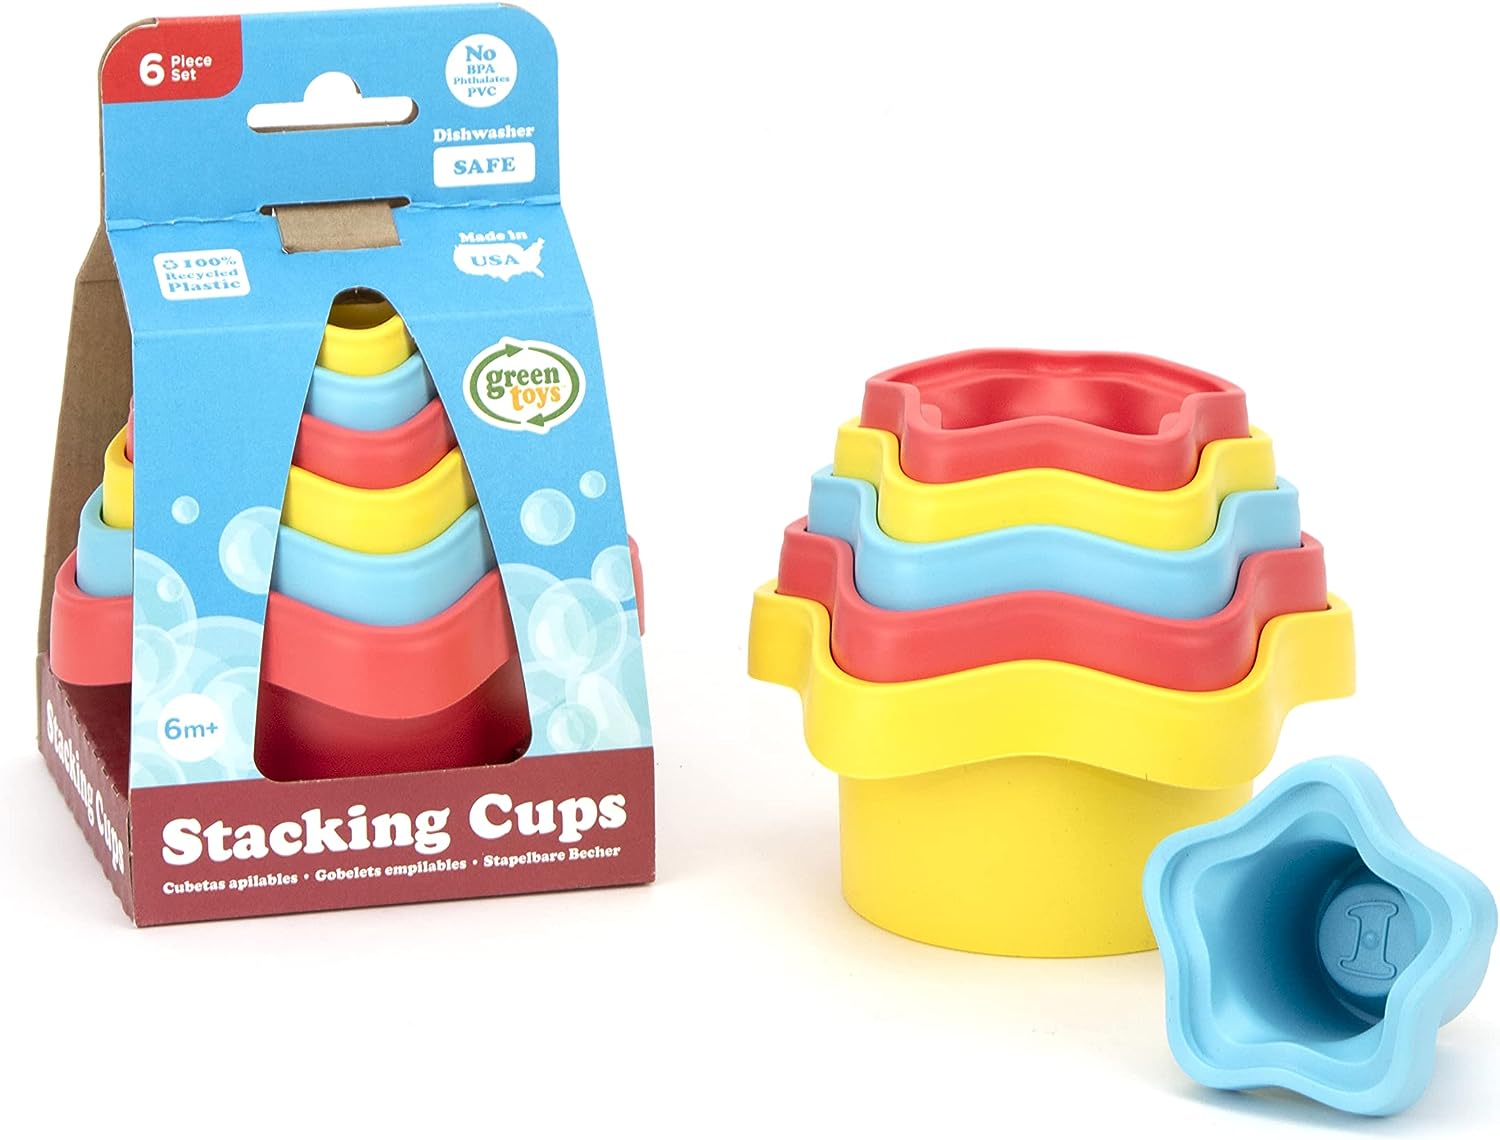 Green Toys Stacking Cups Purple/Blue/Green, Bath Toy